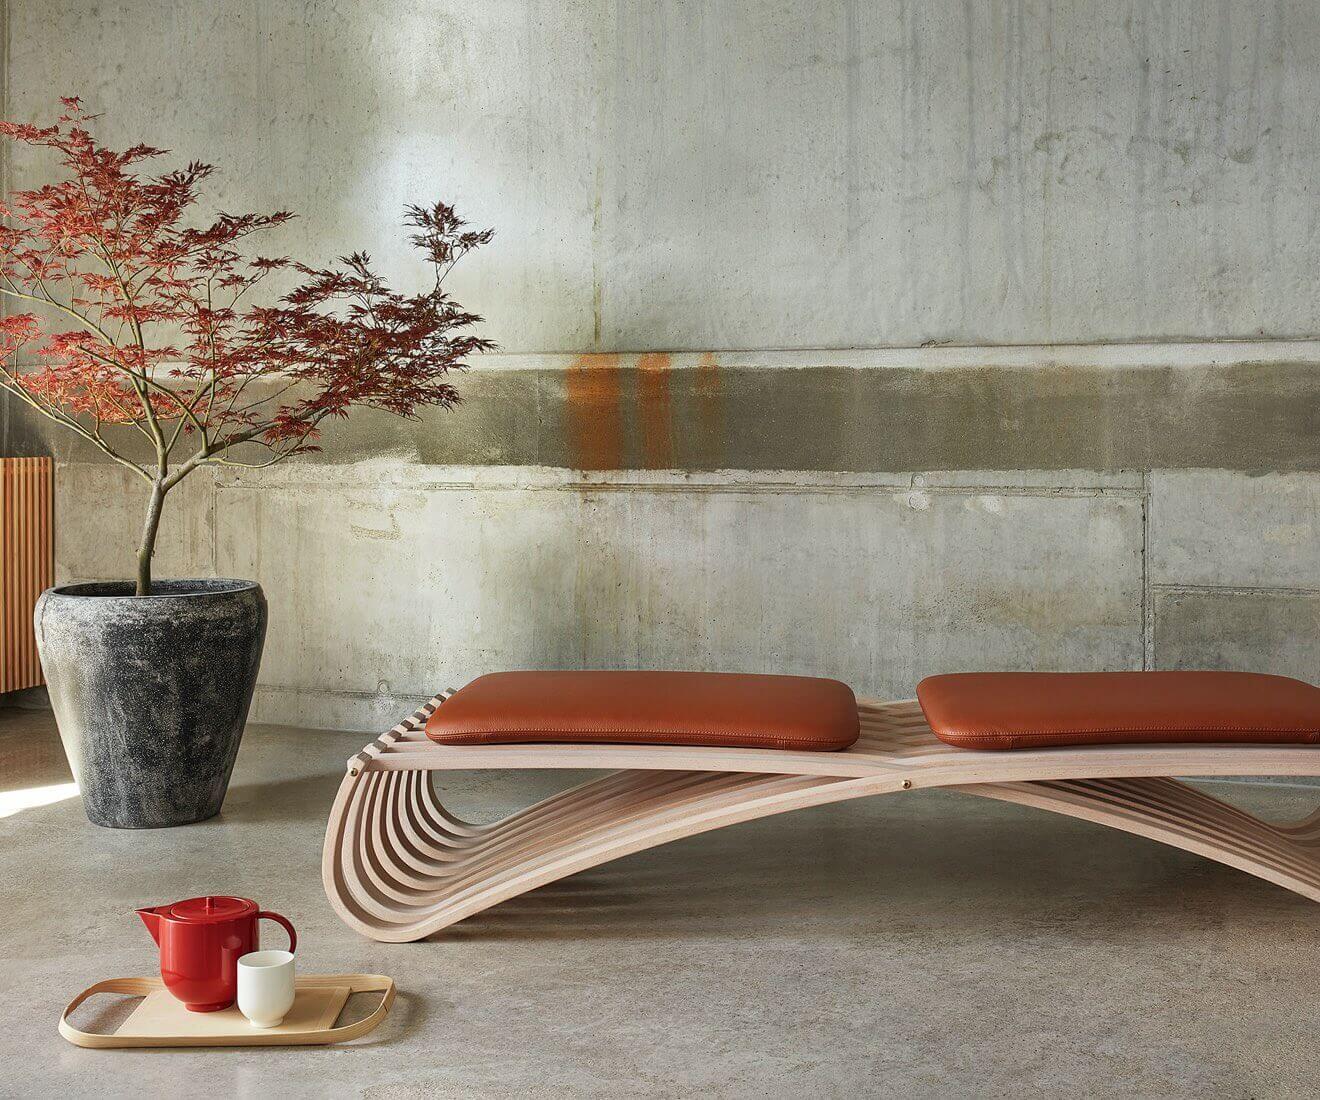 Introducing our JUNDO daybed with beech painted wood base and 1 cushion in cognac Optimo leather from Sorensen.

Jundo is Japanese for purity, which is what the designer, Mads Emil Garde sought for with this poetic design. It is the examination of